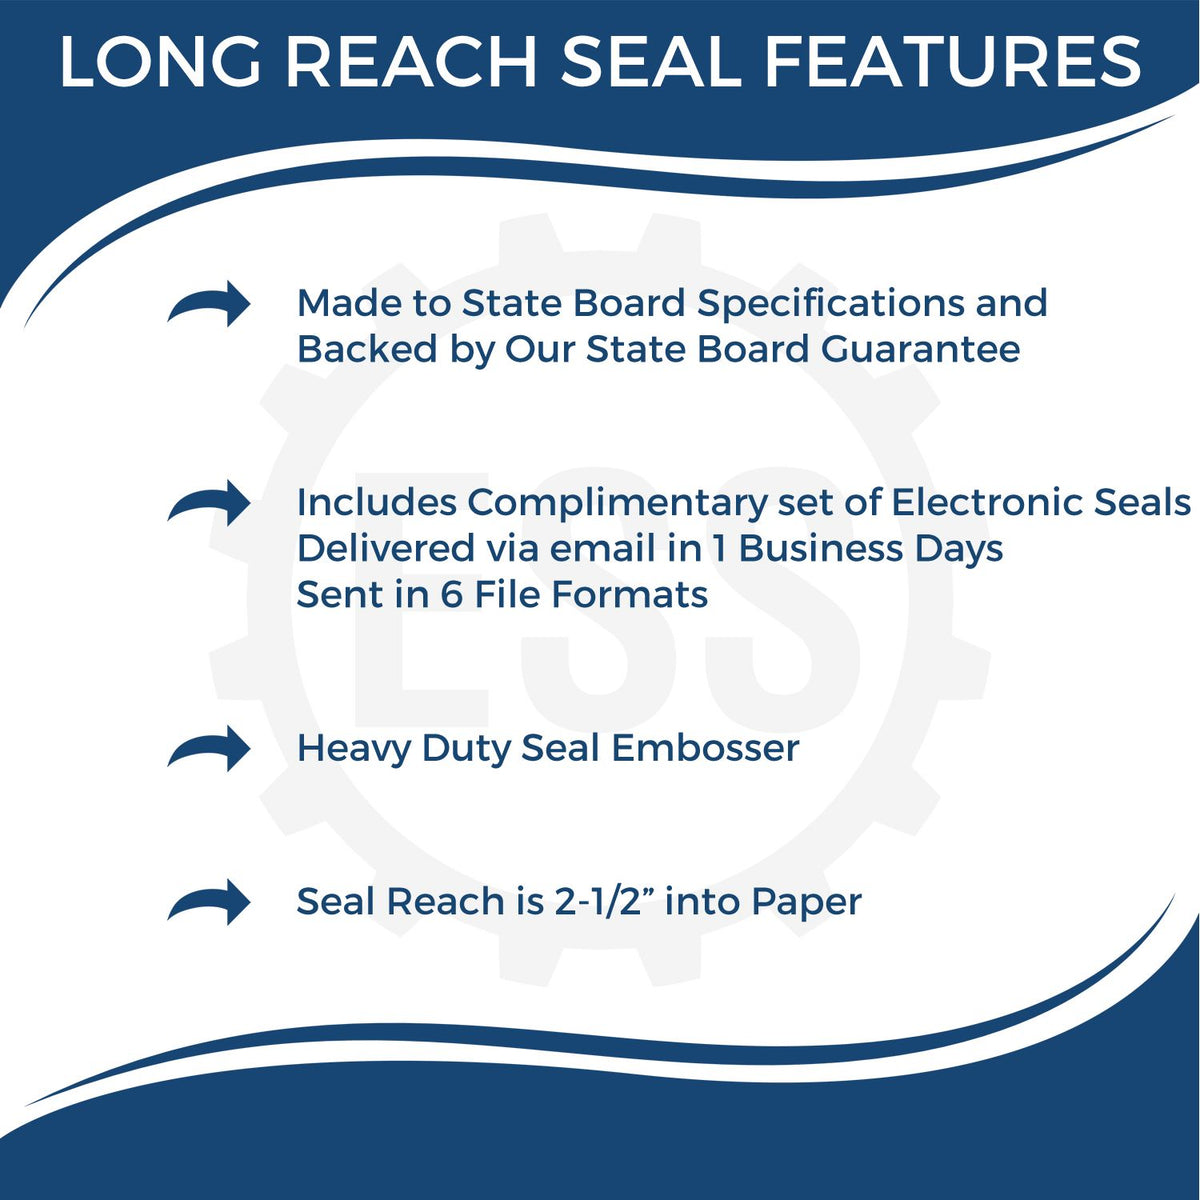 A picture of an infographic highlighting the selling points for the Long Reach Montana PE Seal